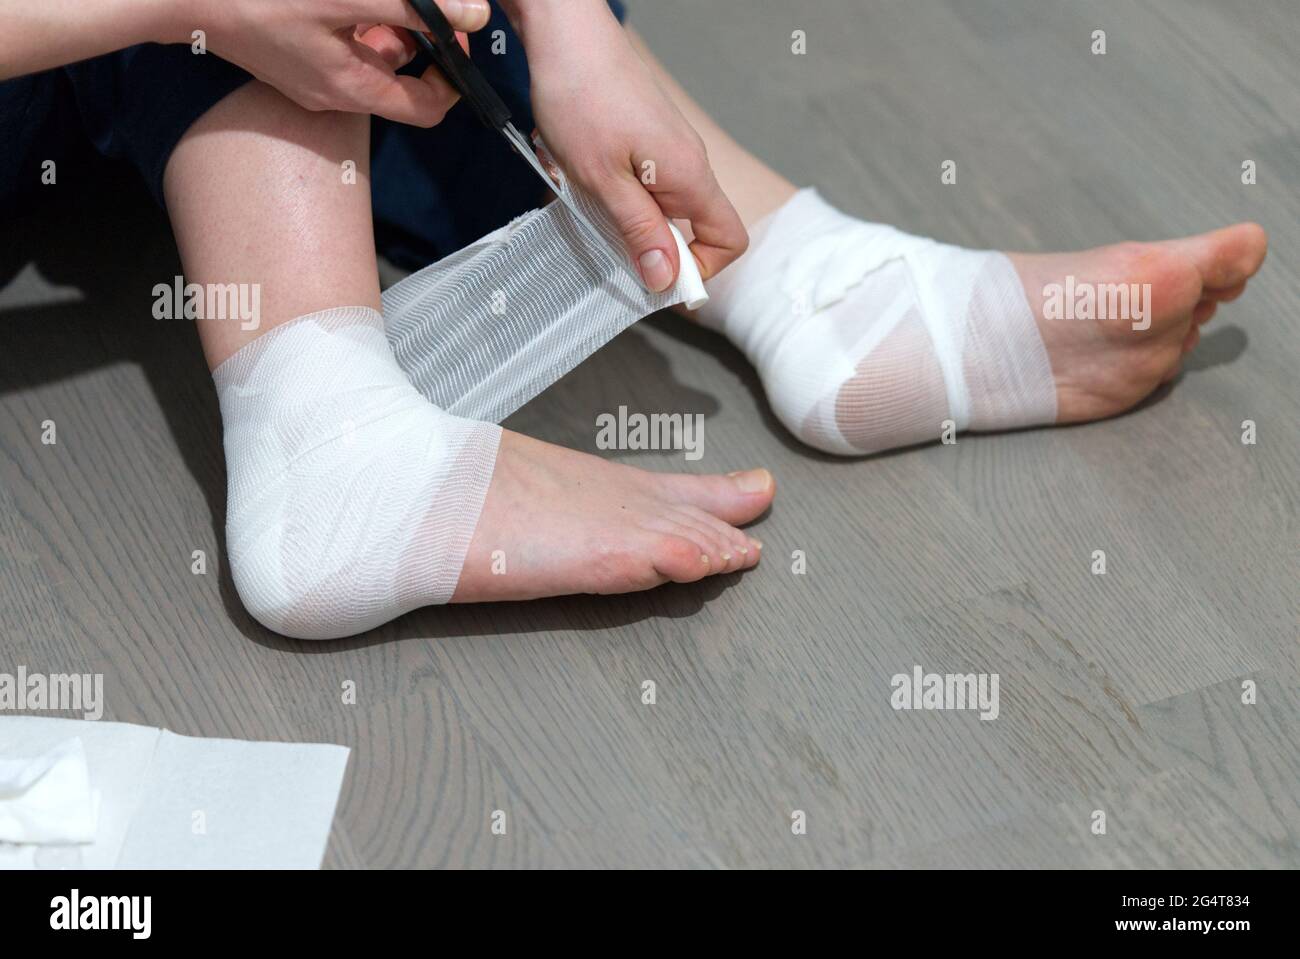 callus on leg. Girl uses ointment, Band-Aid and bandage to treat calluse Stock Photo